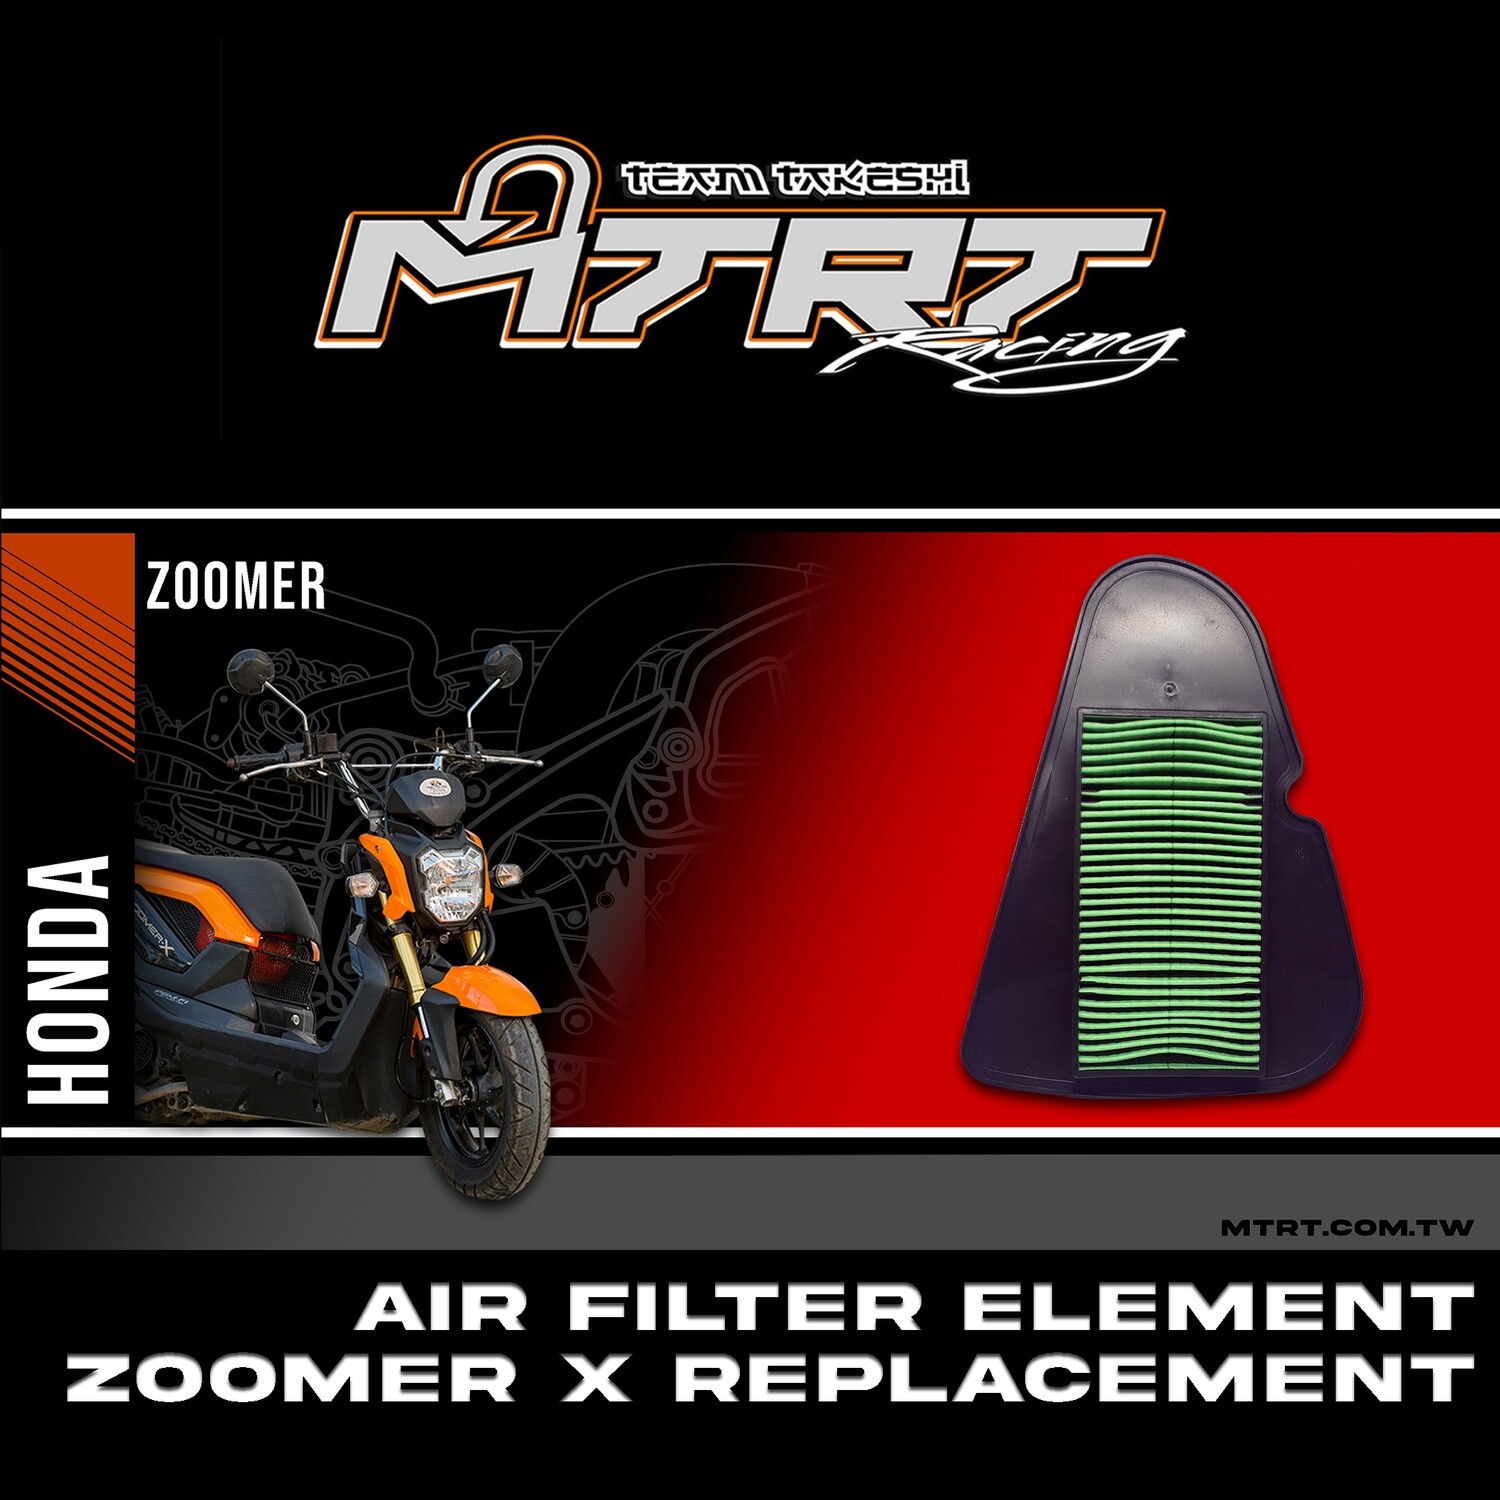 ZOOMER X AIR FILTER ELEMENT REPLACEMENT